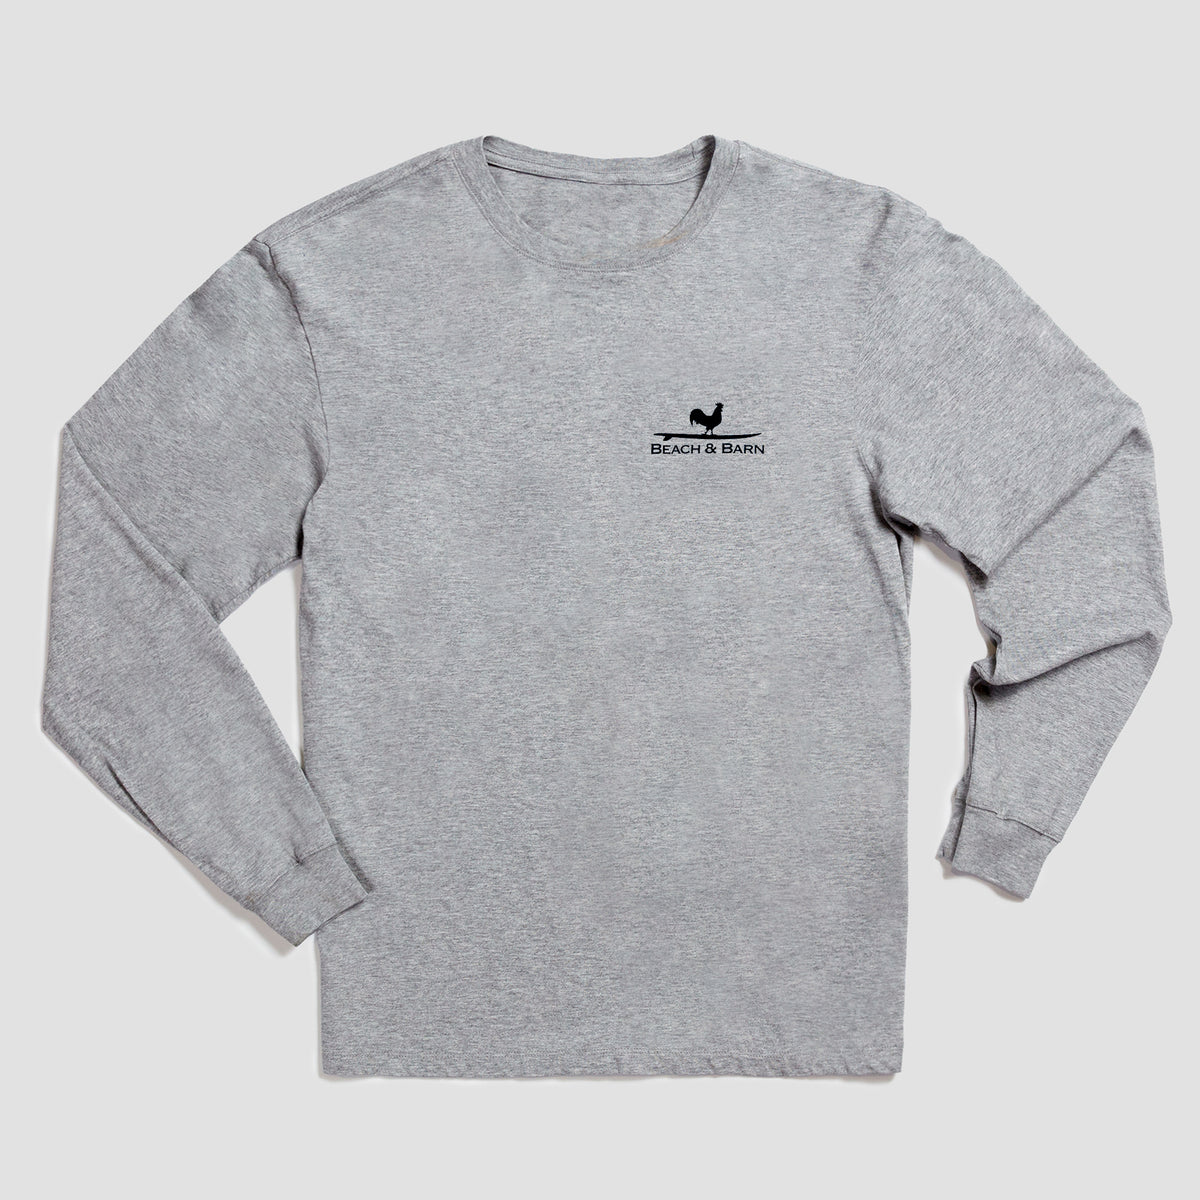 Small Towns &amp; Big Bodies of Water Long Sleeve Tee Shirt